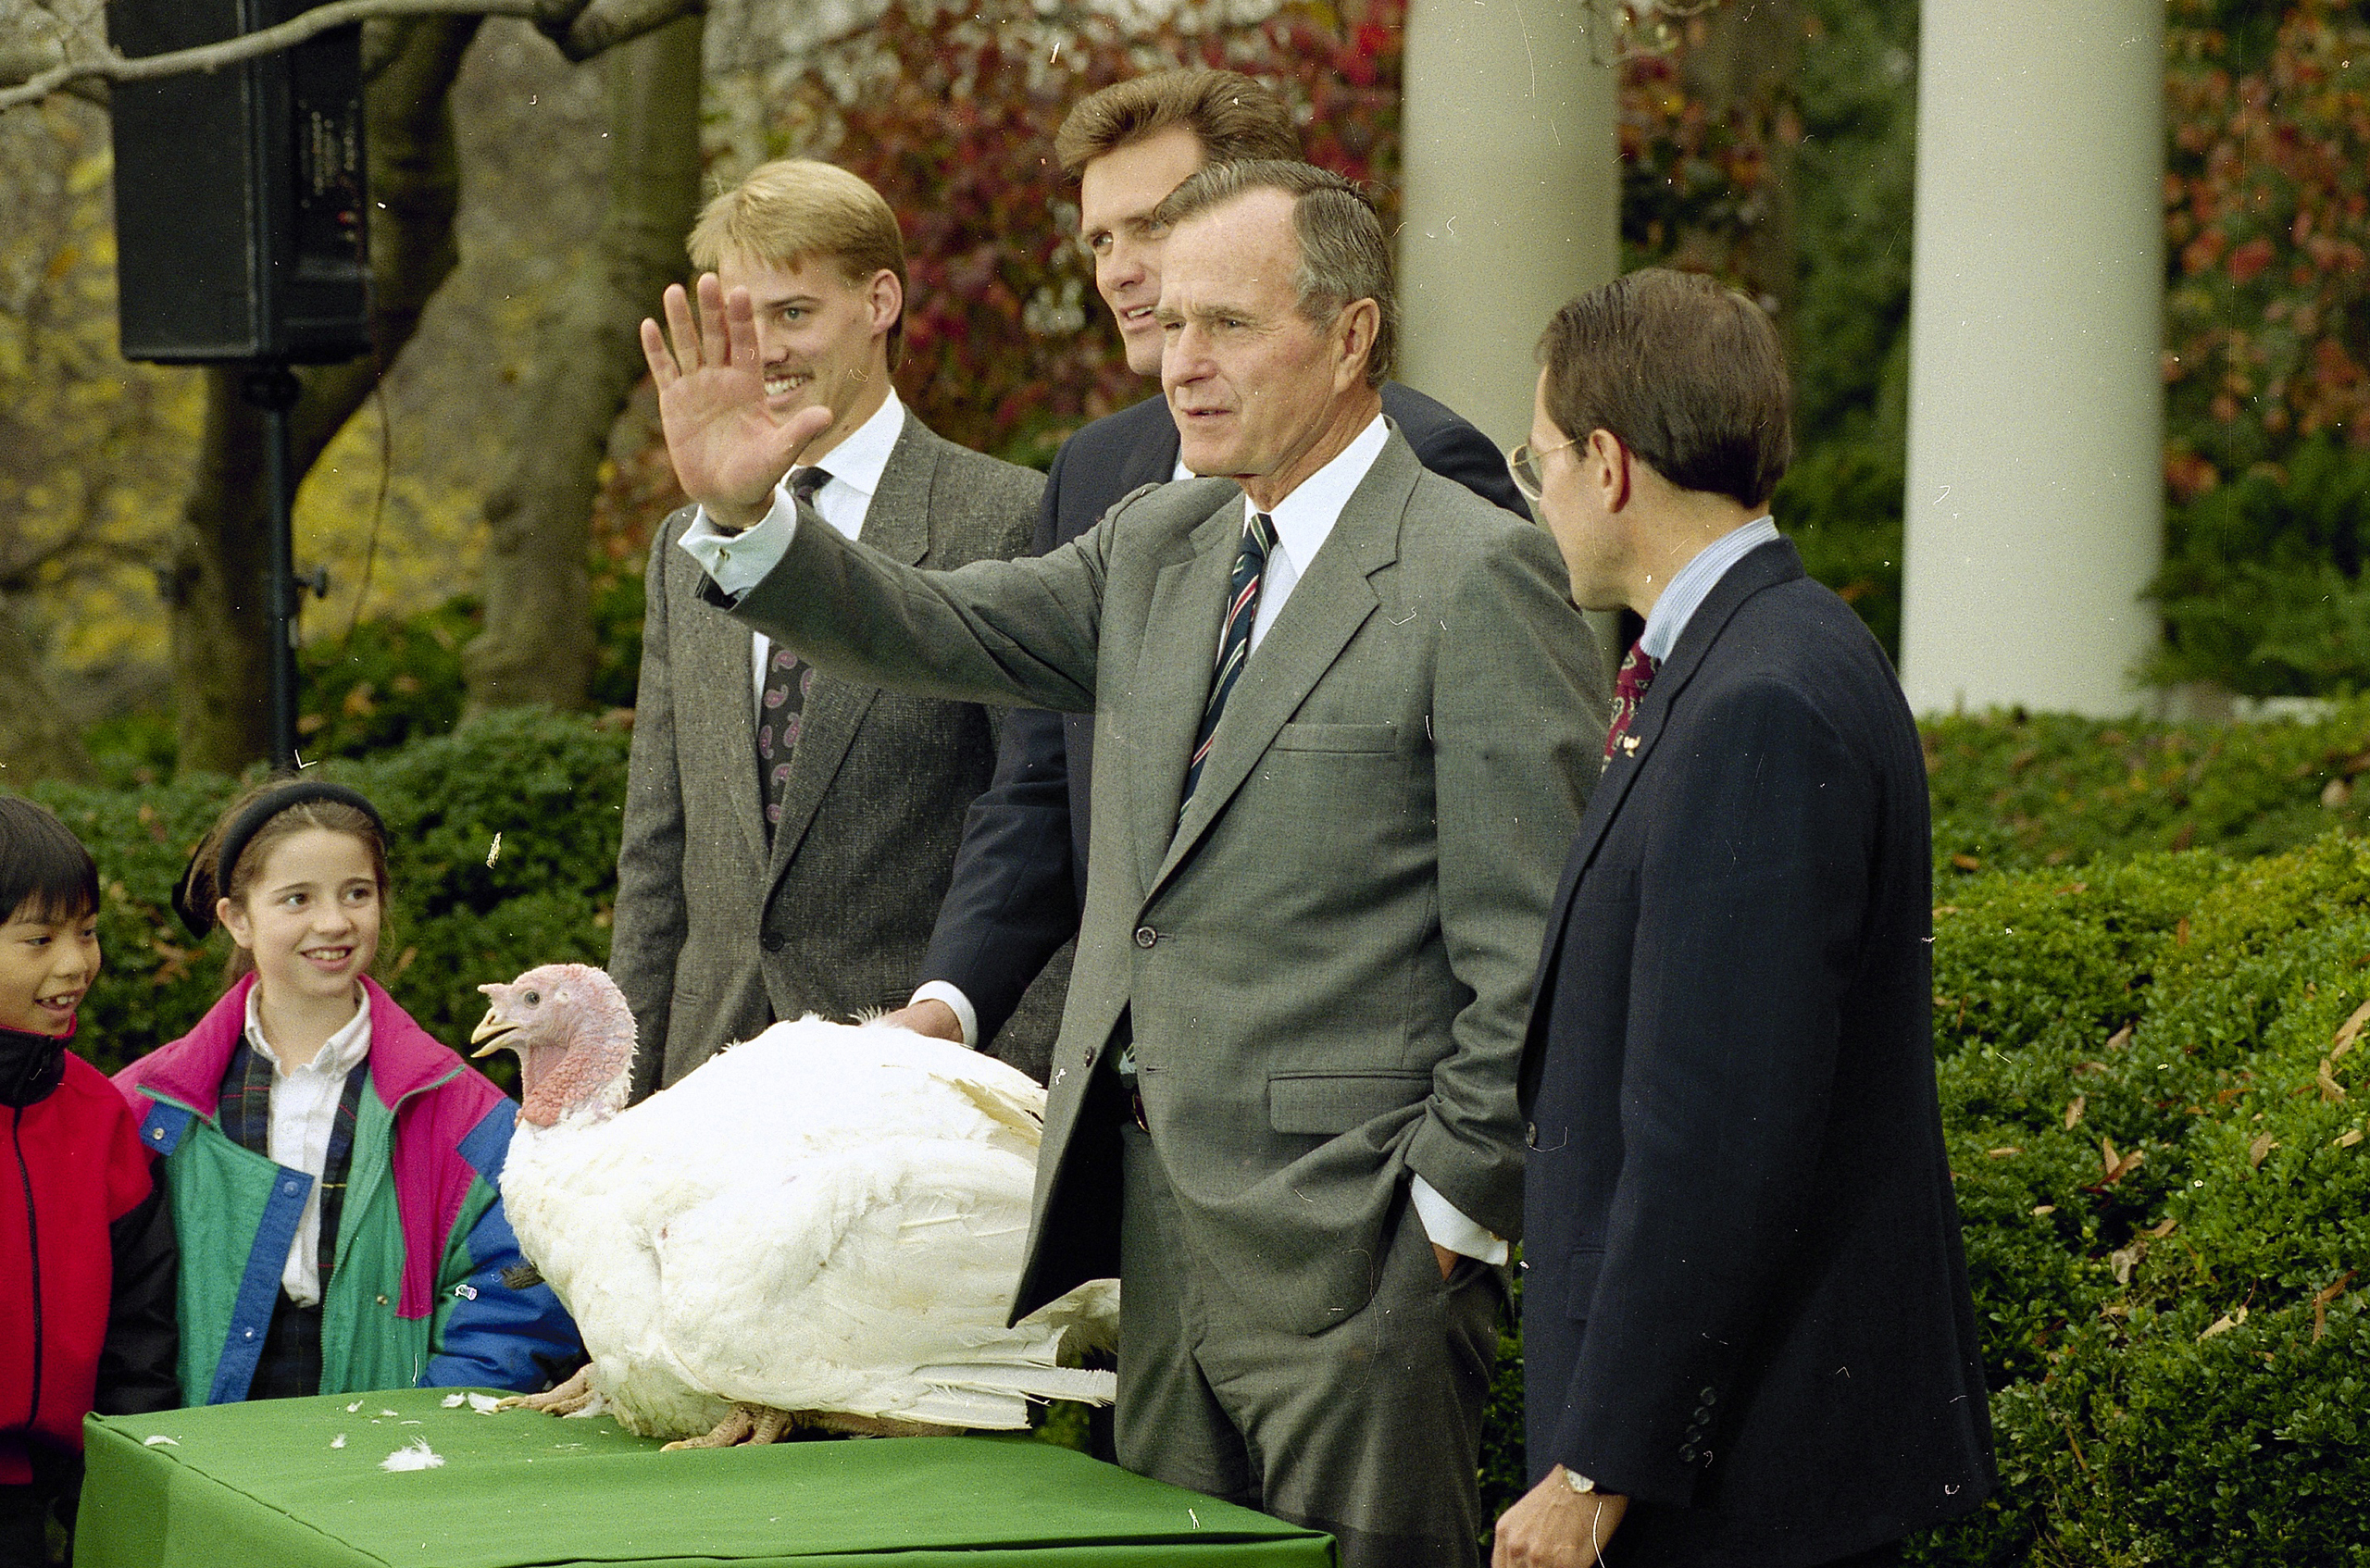 President George H.W. Bush gestures during a Rose Garden ceremony where he pardoned the Thanksgiving turkey presented by the National Turkey Federation, on Nov. 25, 1992.